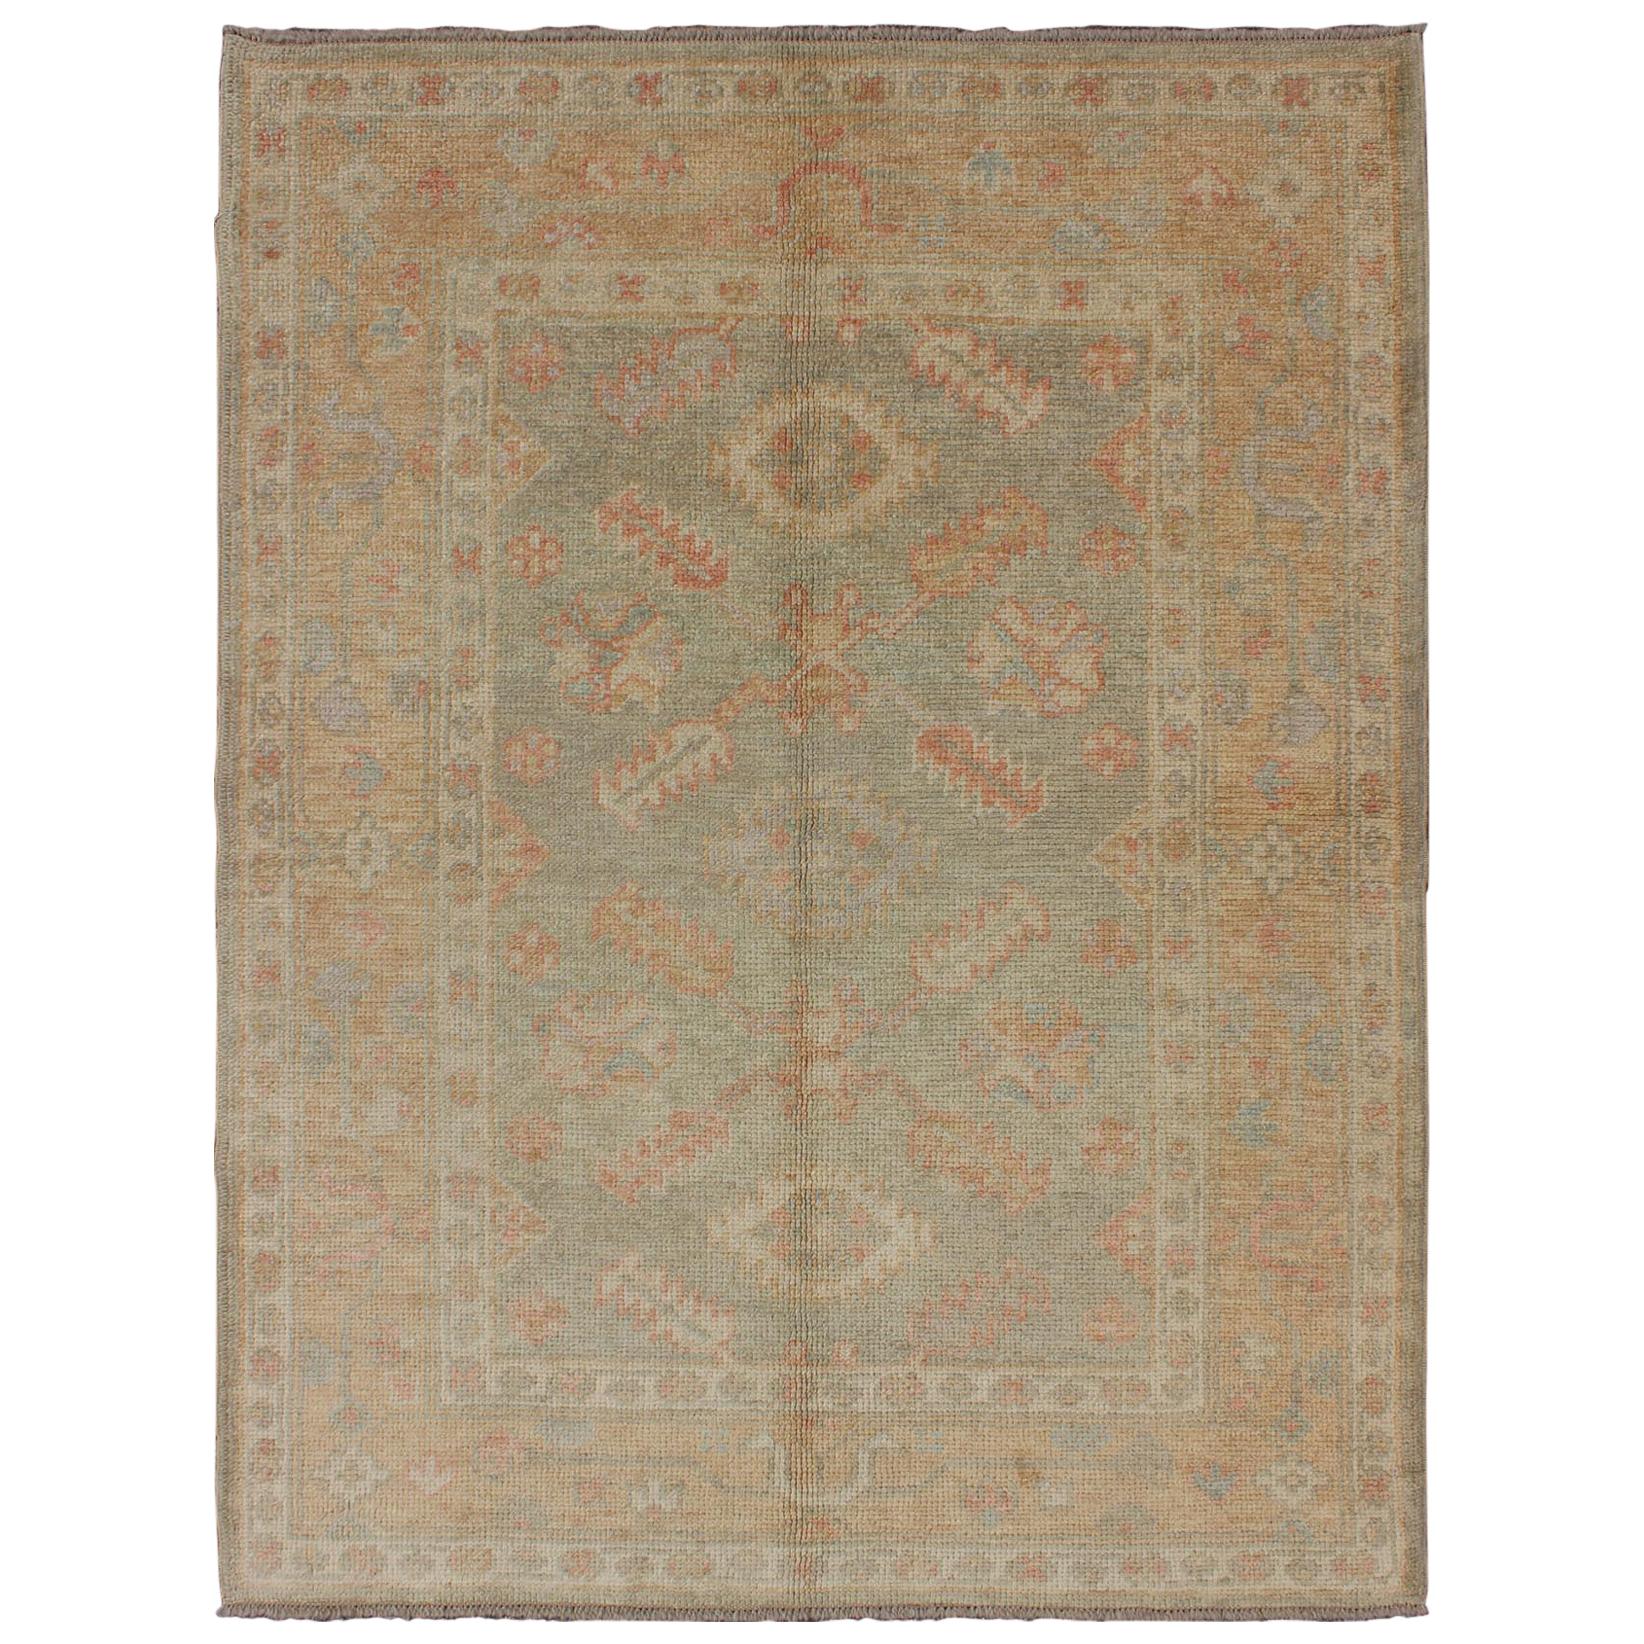 Turkish New Oushak Rug with Green, Neutral Colors and All-Over Flower Design